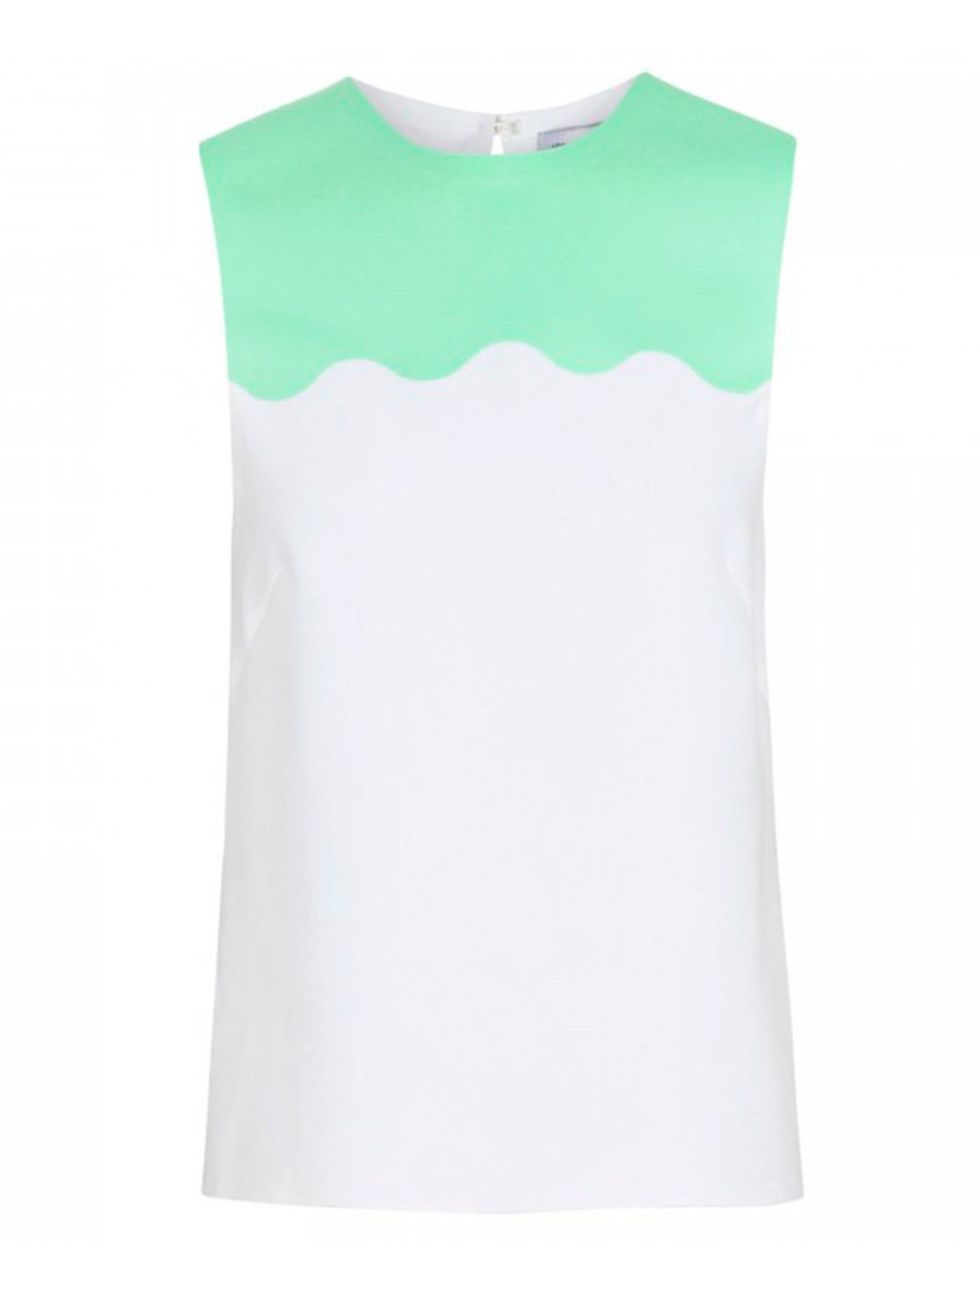 <p><a href="http://www.elleuk.com/catwalk/designer-a-z/jonathan-saunders">Jonathan Saunders</a> 'Iva' crepe tank, £435, available from <a href="http://www.harveynichols.com/womens-1/categories/designer-tops/tanks-camis/s486190-iva-scallop-trimmed-crepe-ta